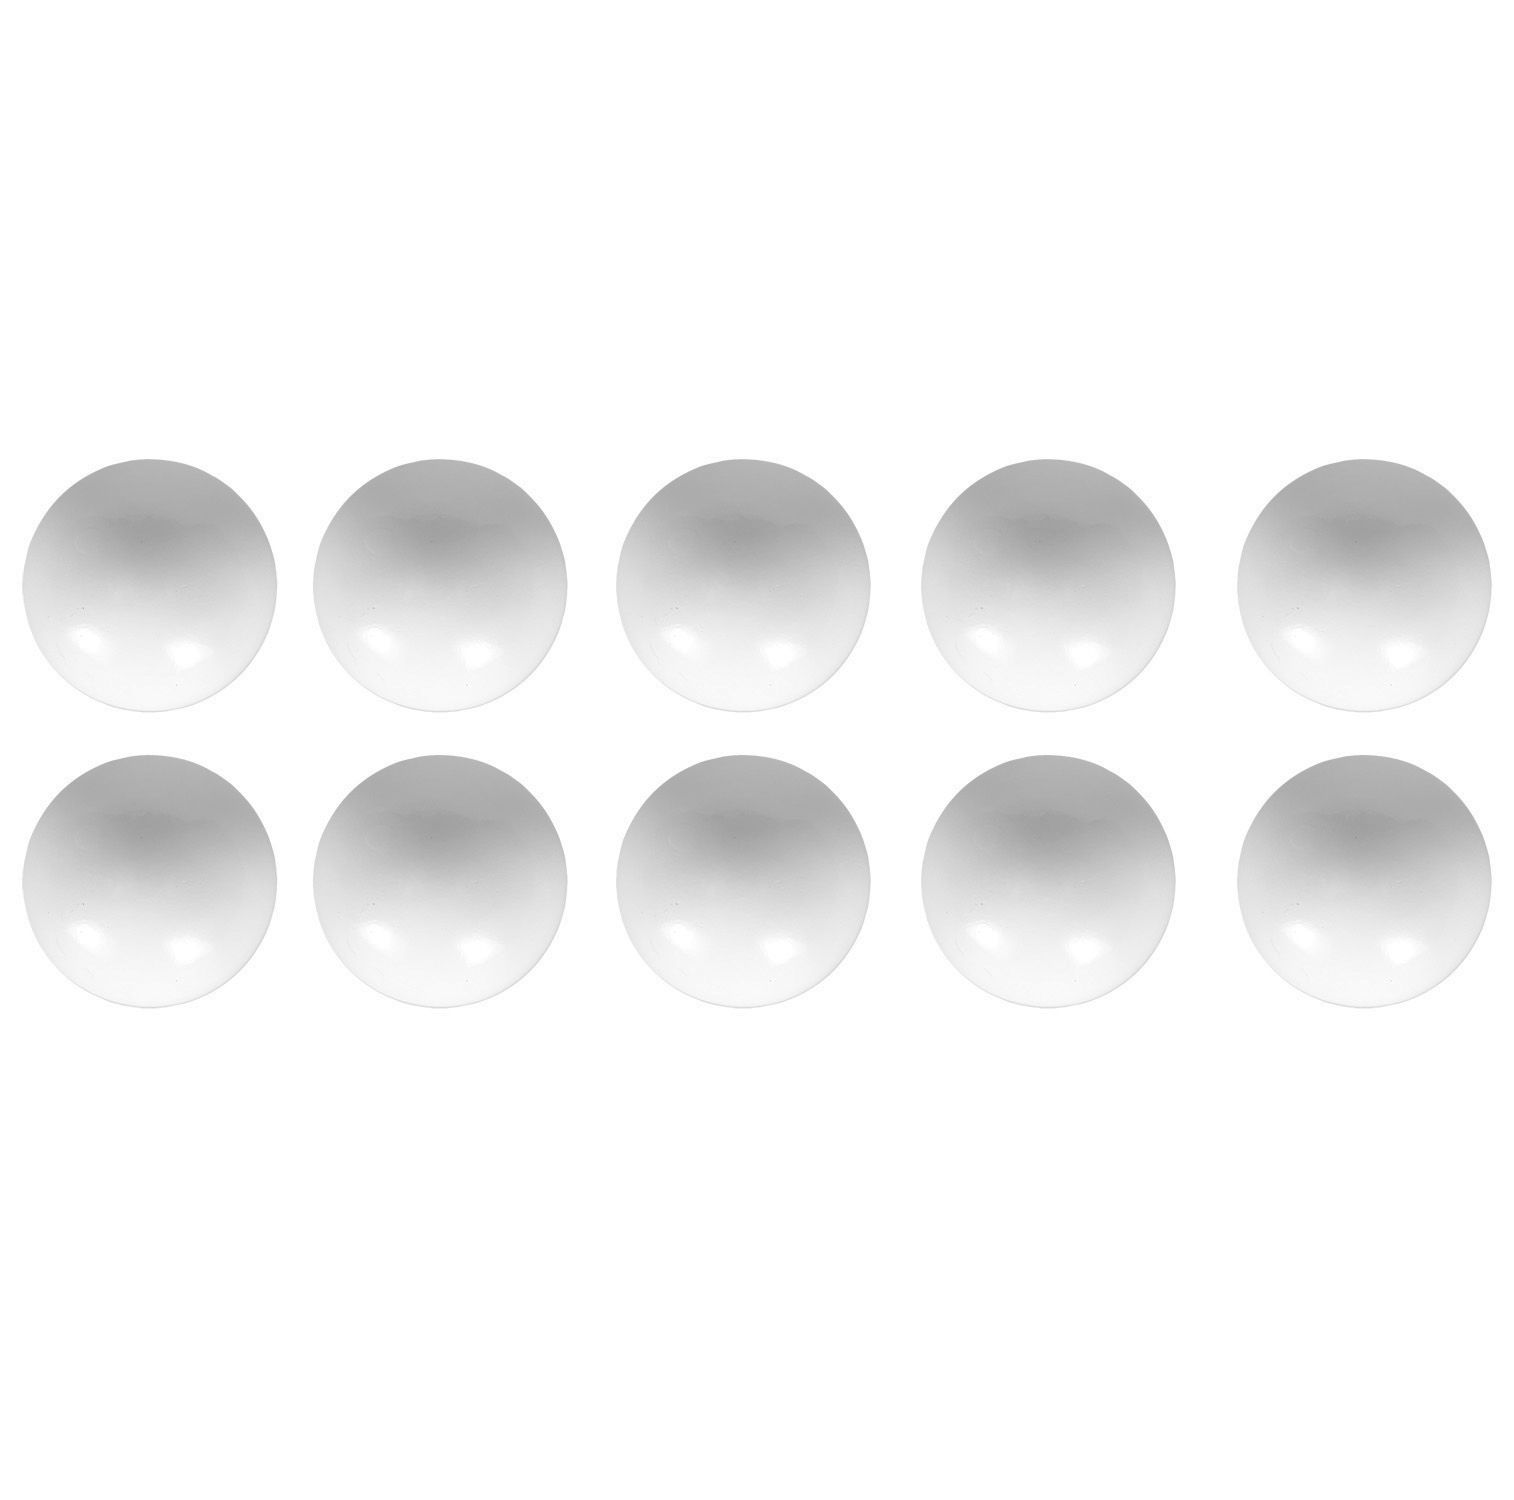 Image of Wickes Ball Top Door Knob - White Plastic 37mm Pack of 10